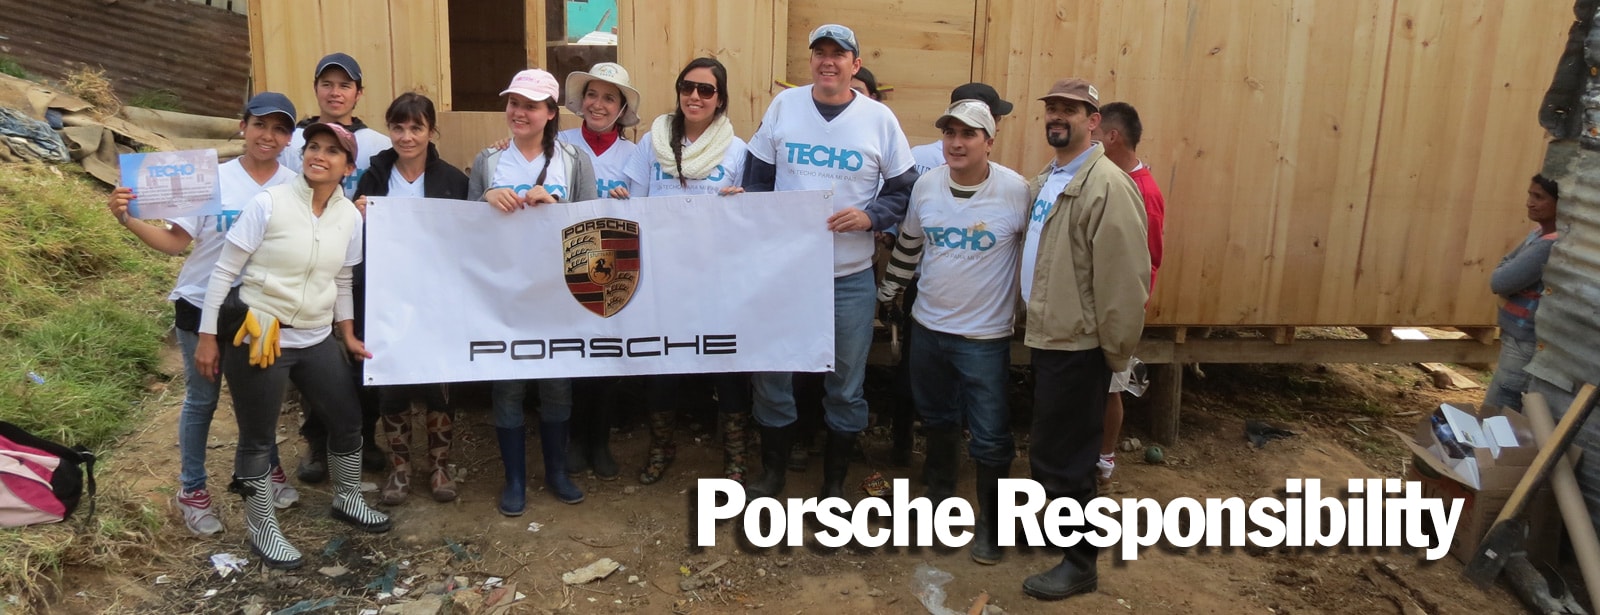 Porsche Responsibility page banner | A group of people who helped build a house, standing together and holding a Porsche banner